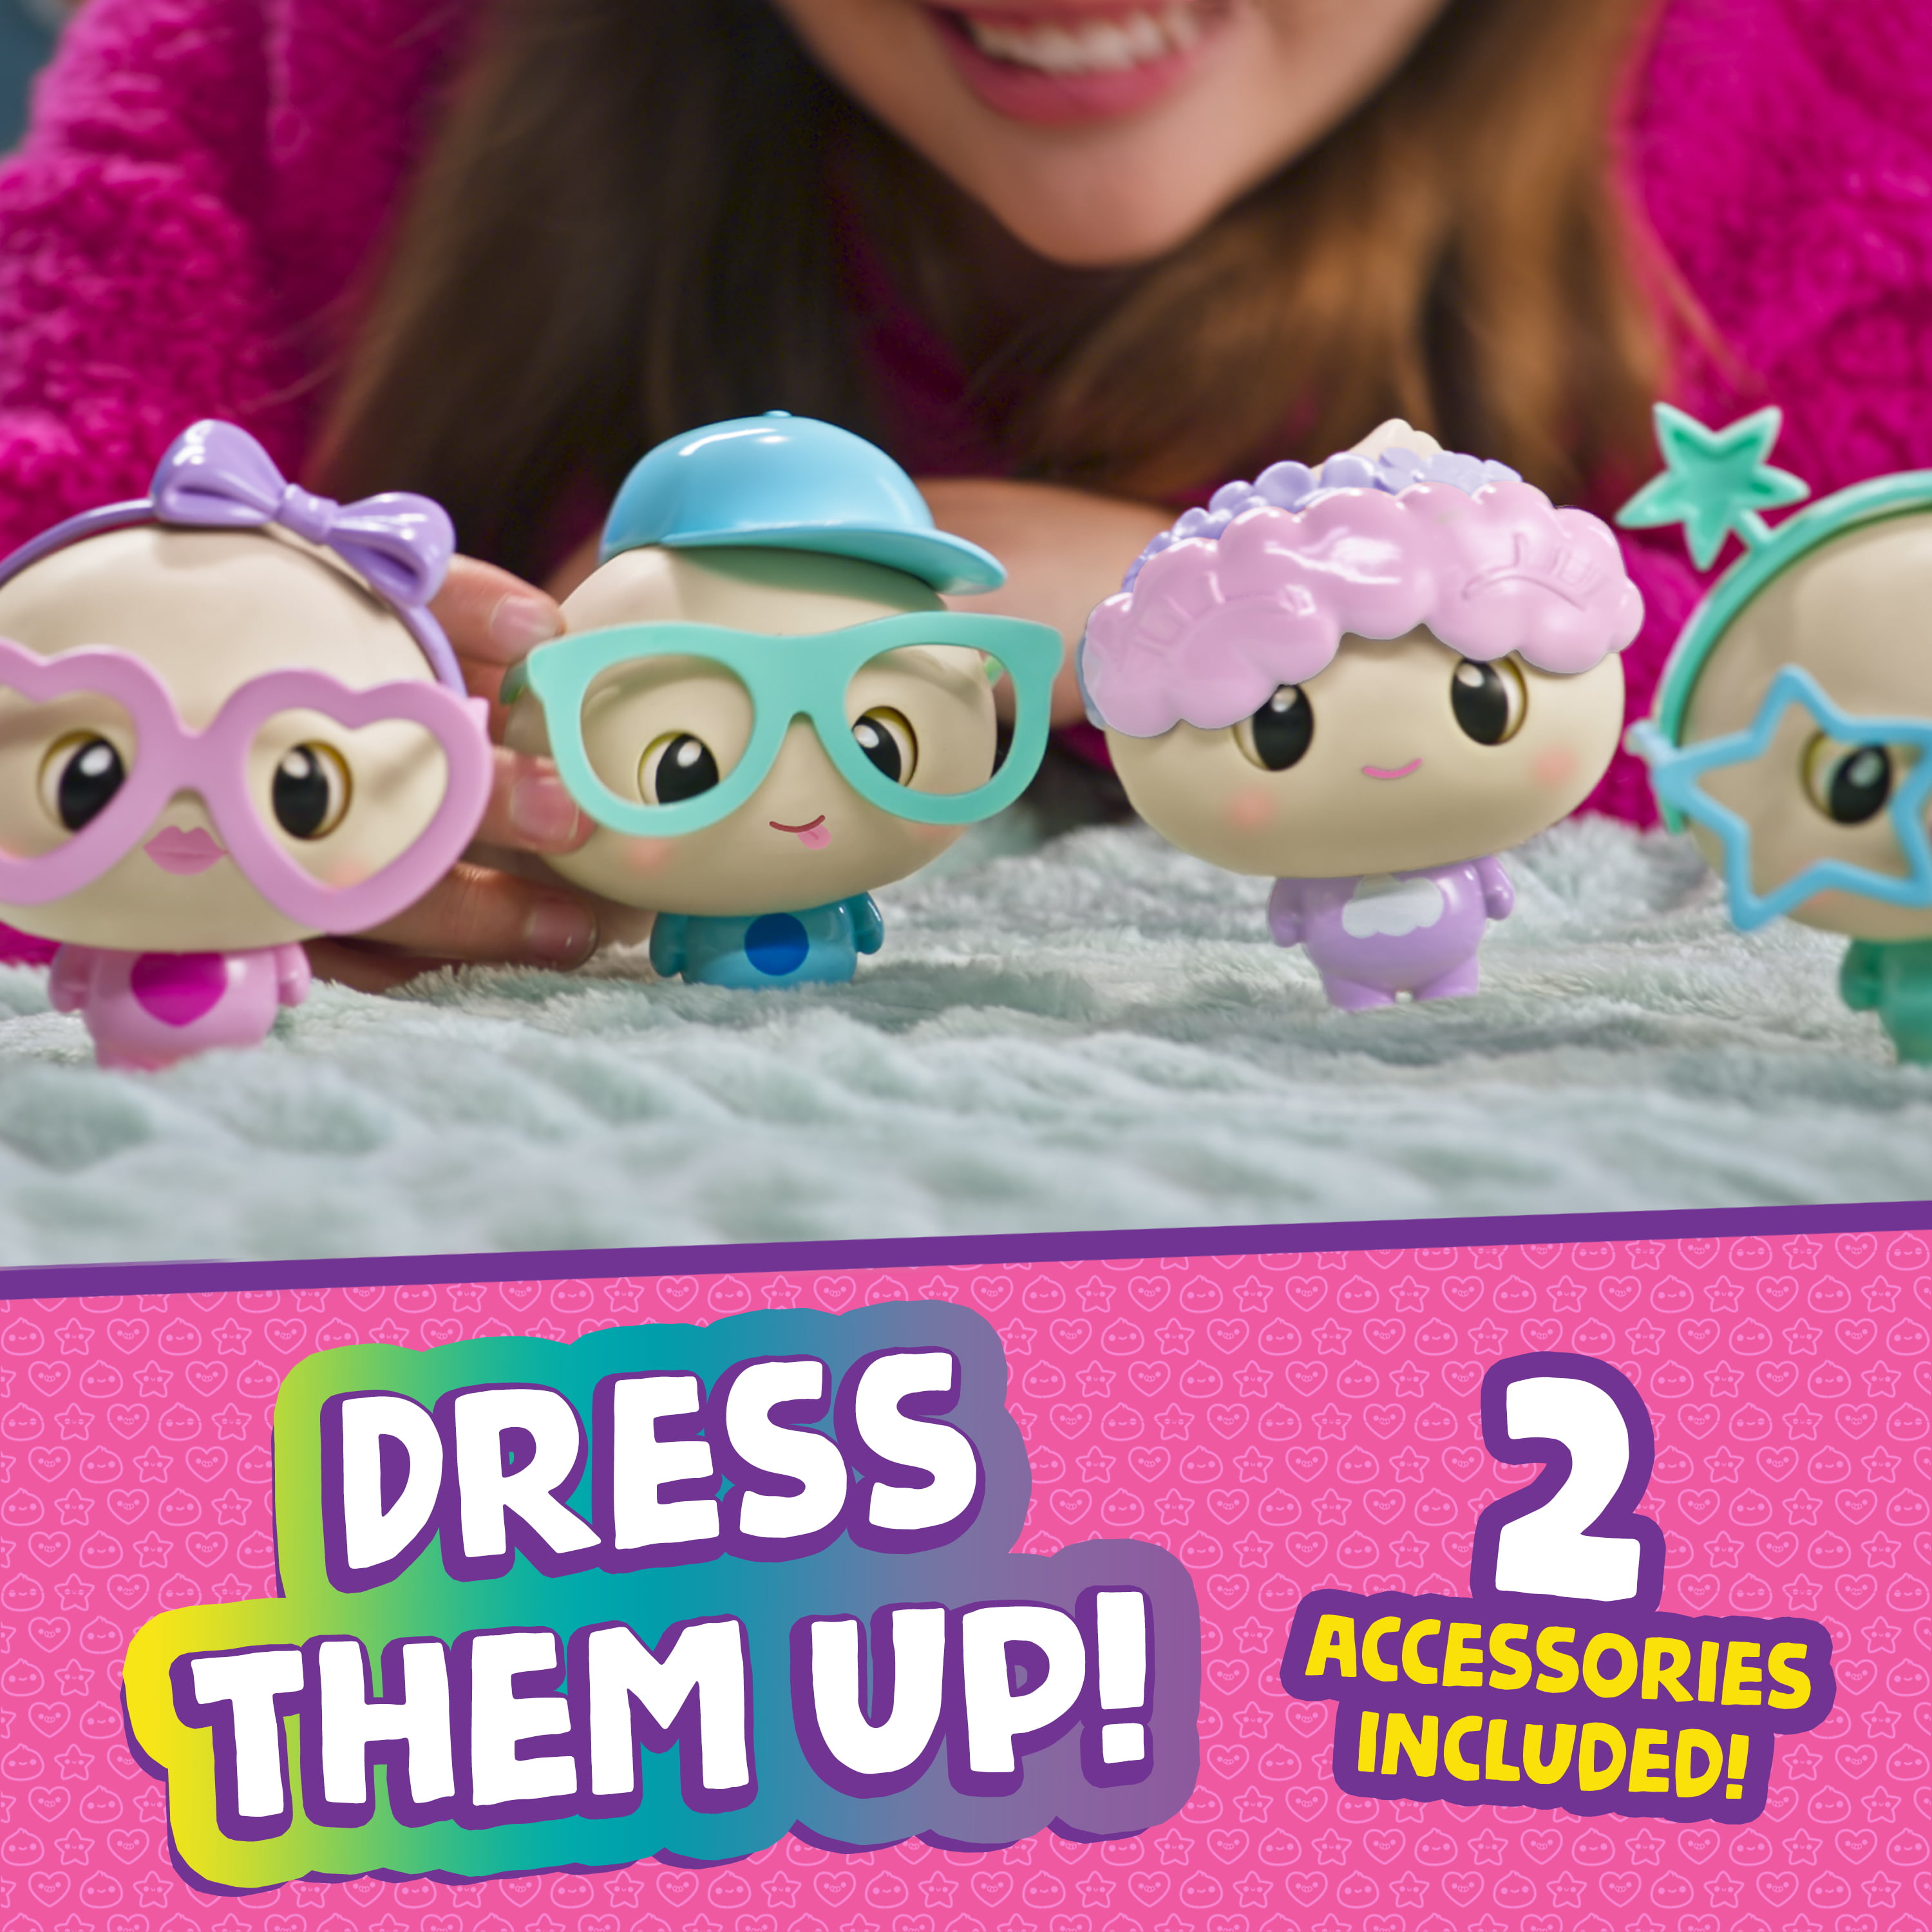 My Squishy Little Dumplings – Interactive Doll Collectible With 